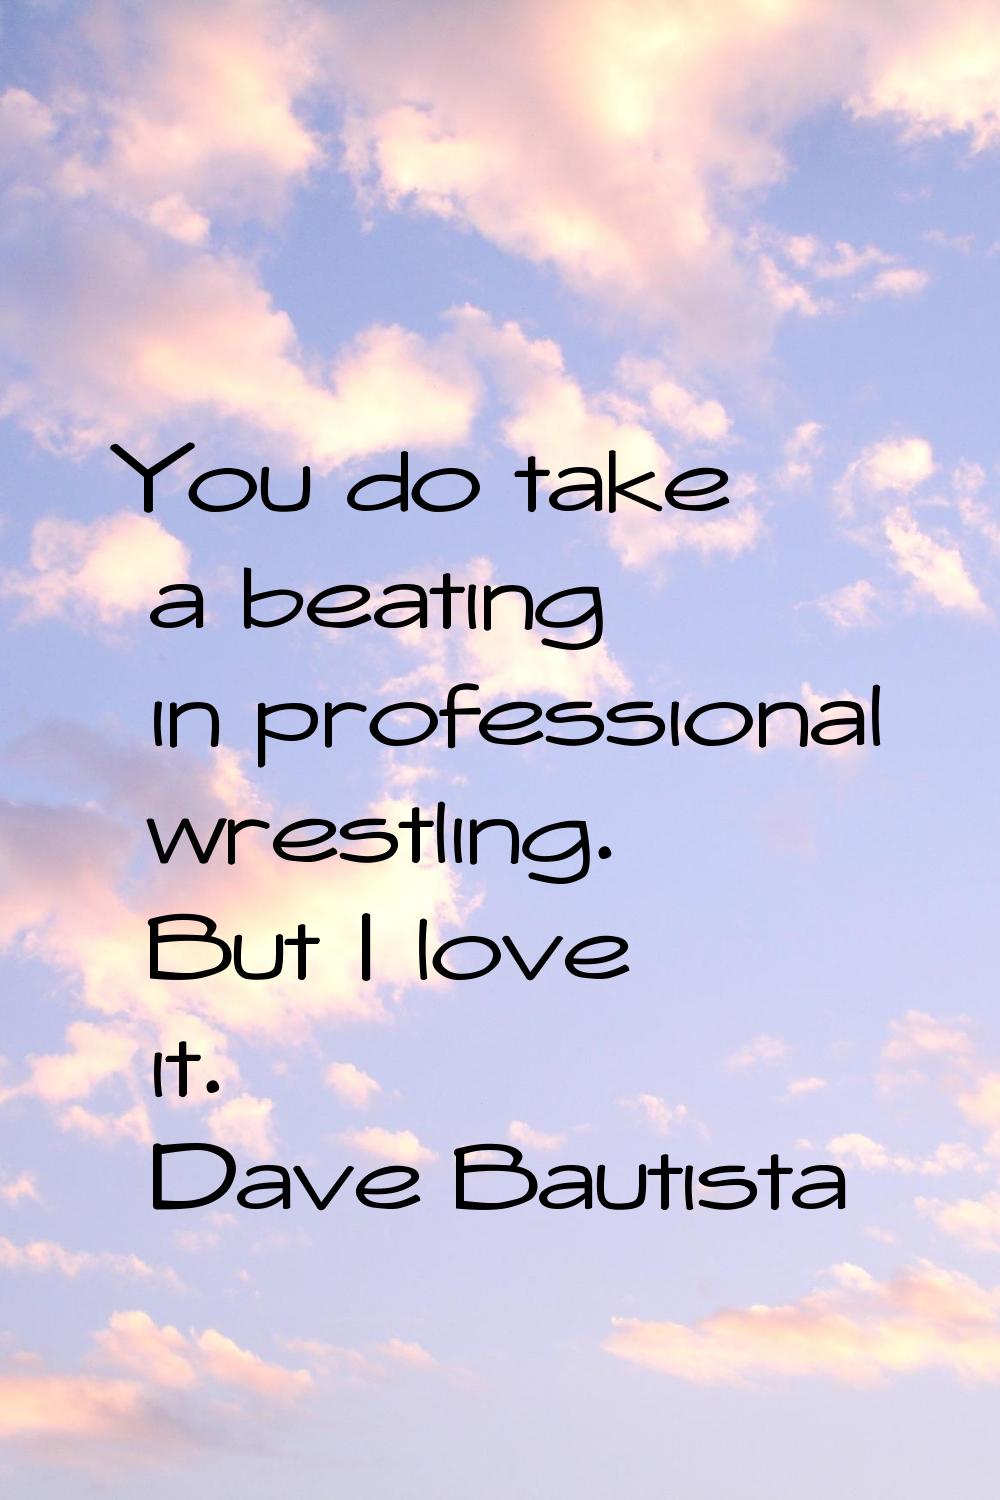 You do take a beating in professional wrestling. But I love it.